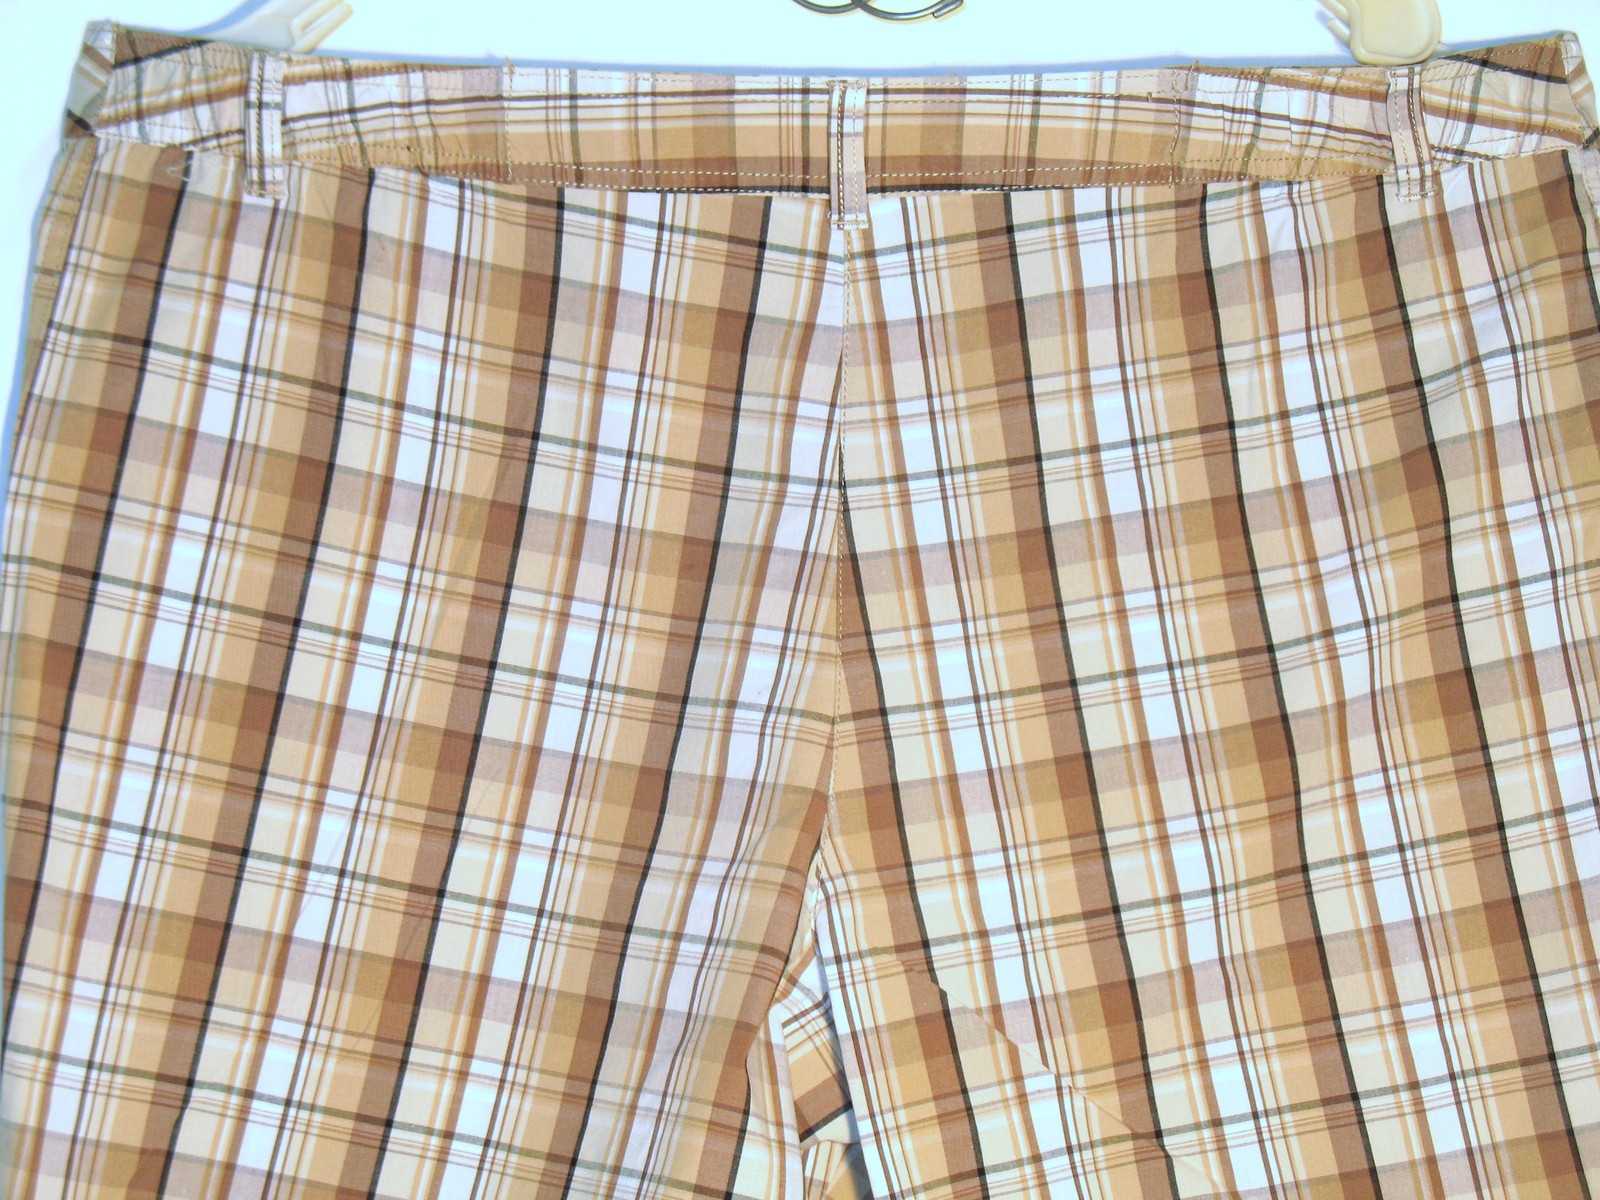 2-just my size brown plaid2.jpg  by BudgetGeneral